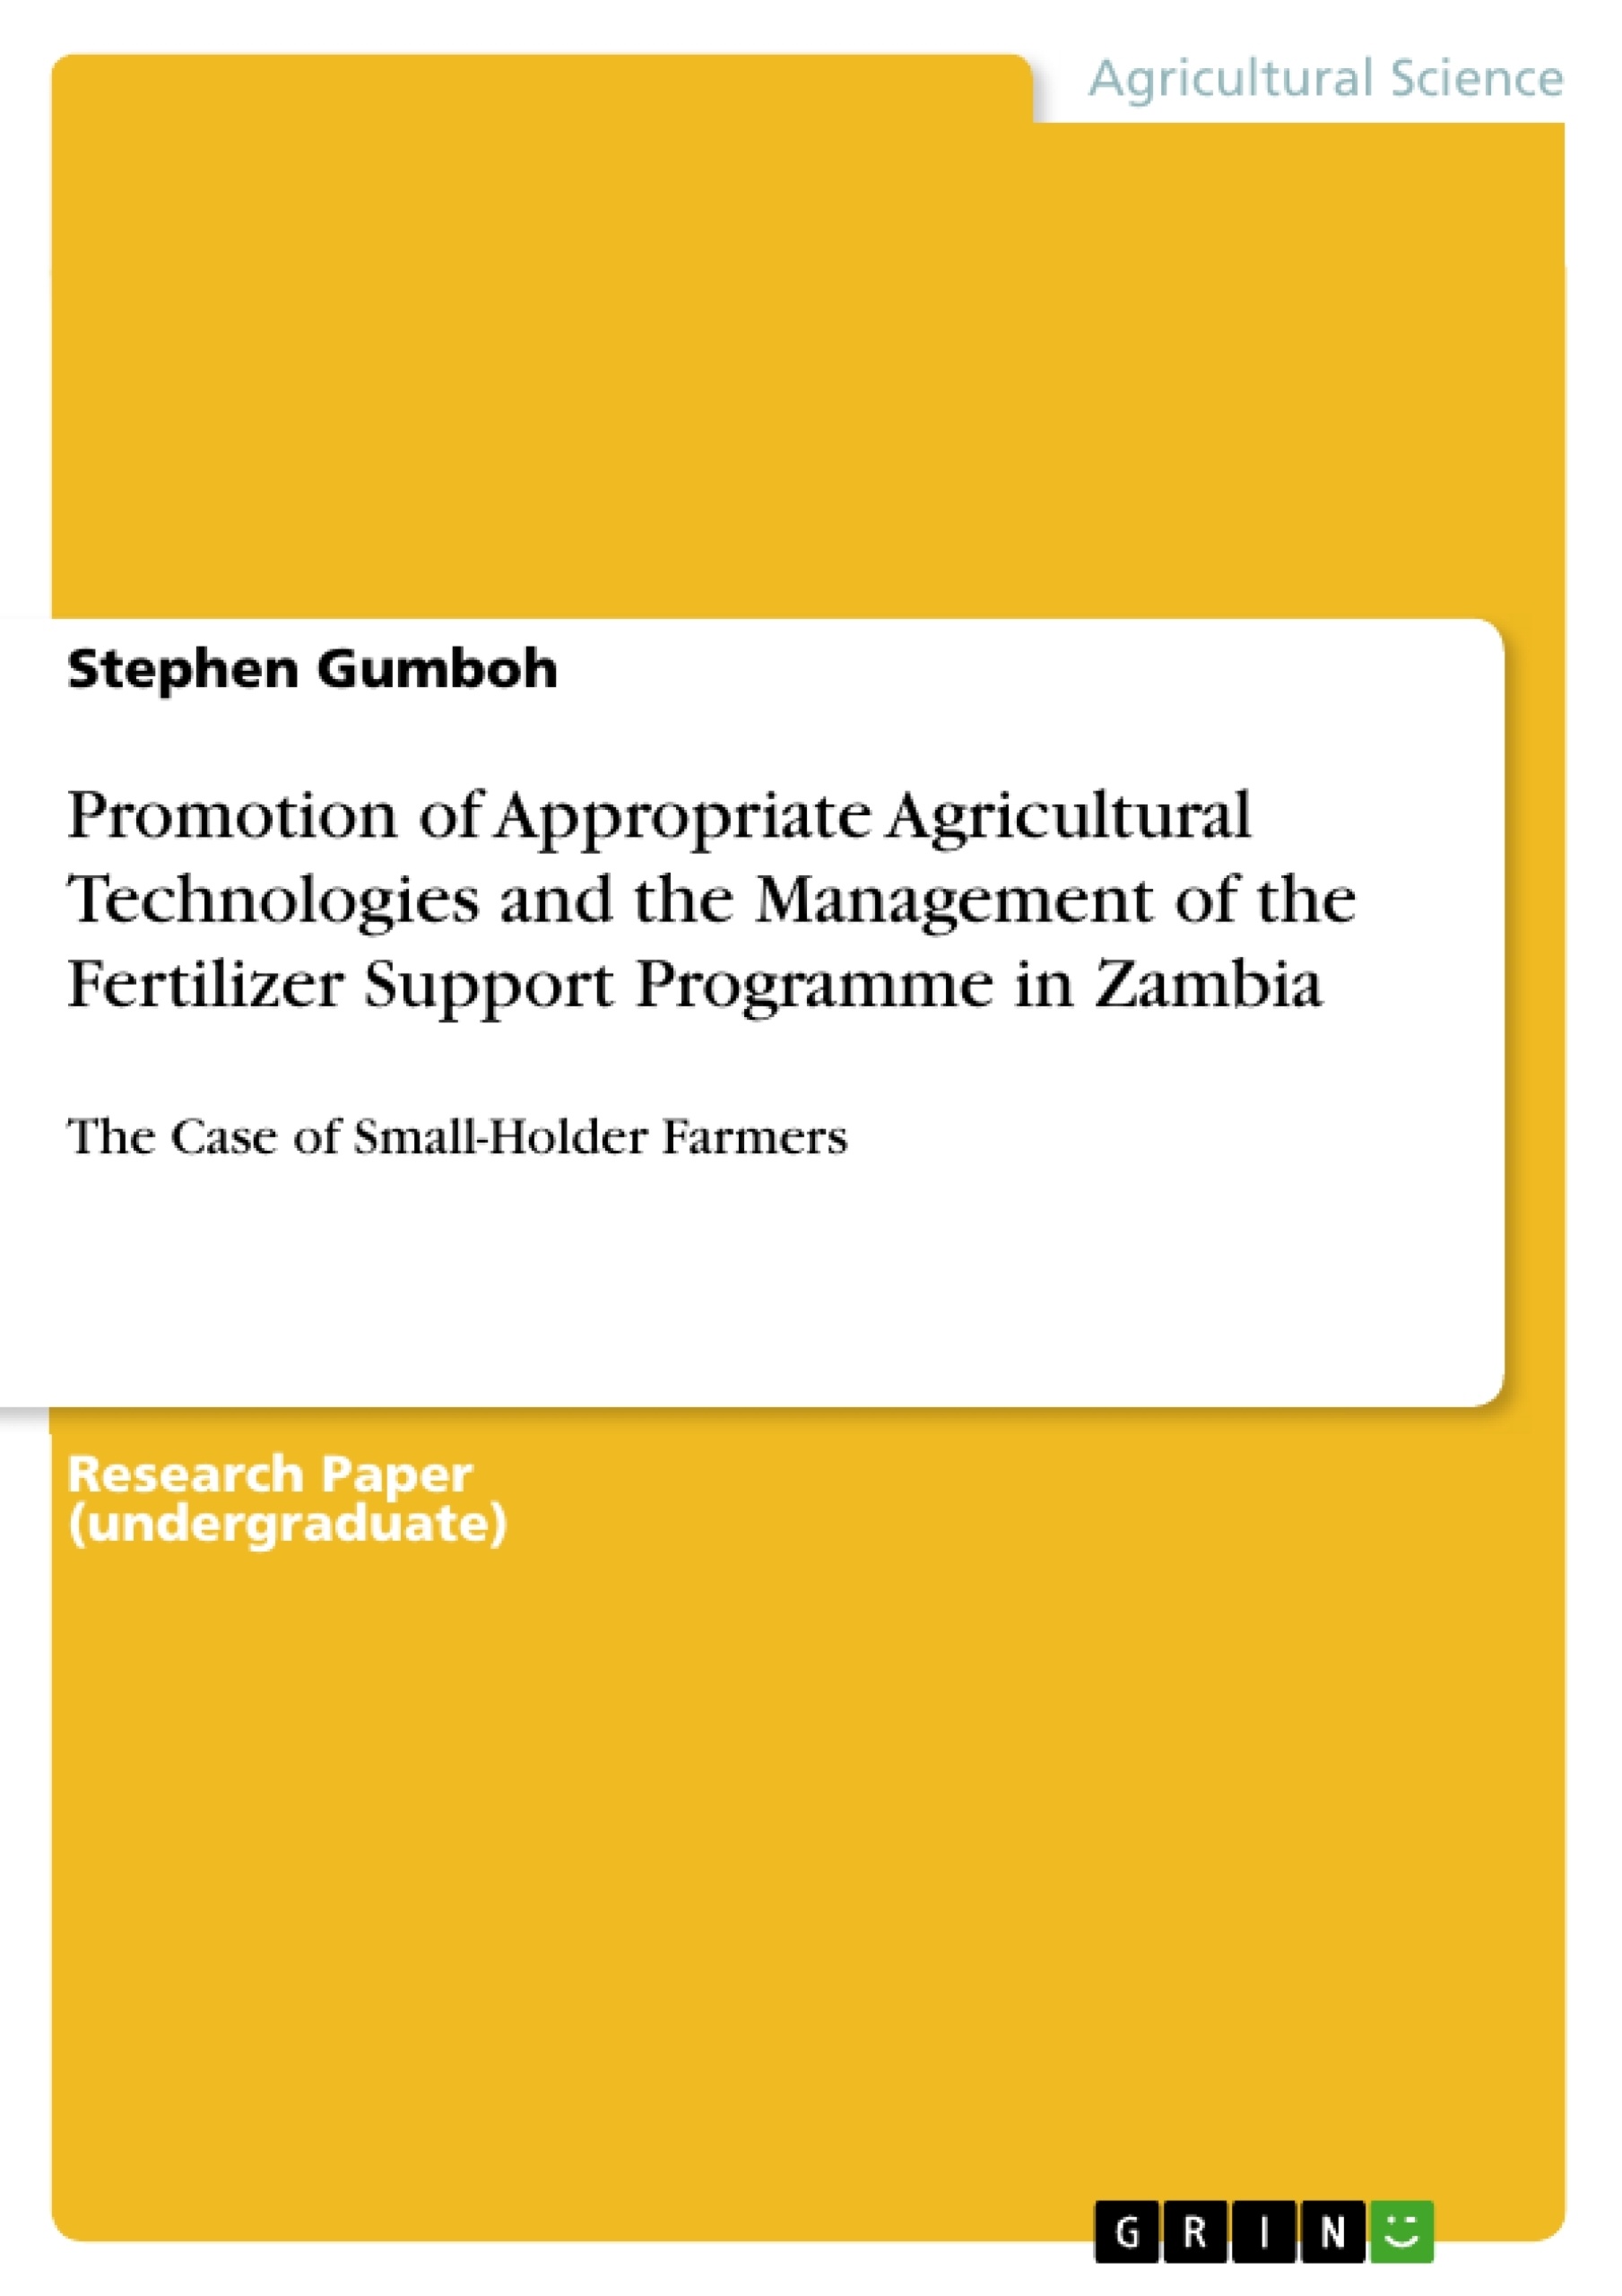 Título: Promotion of Appropriate Agricultural Technologies and the Management of the Fertilizer Support Programme in Zambia